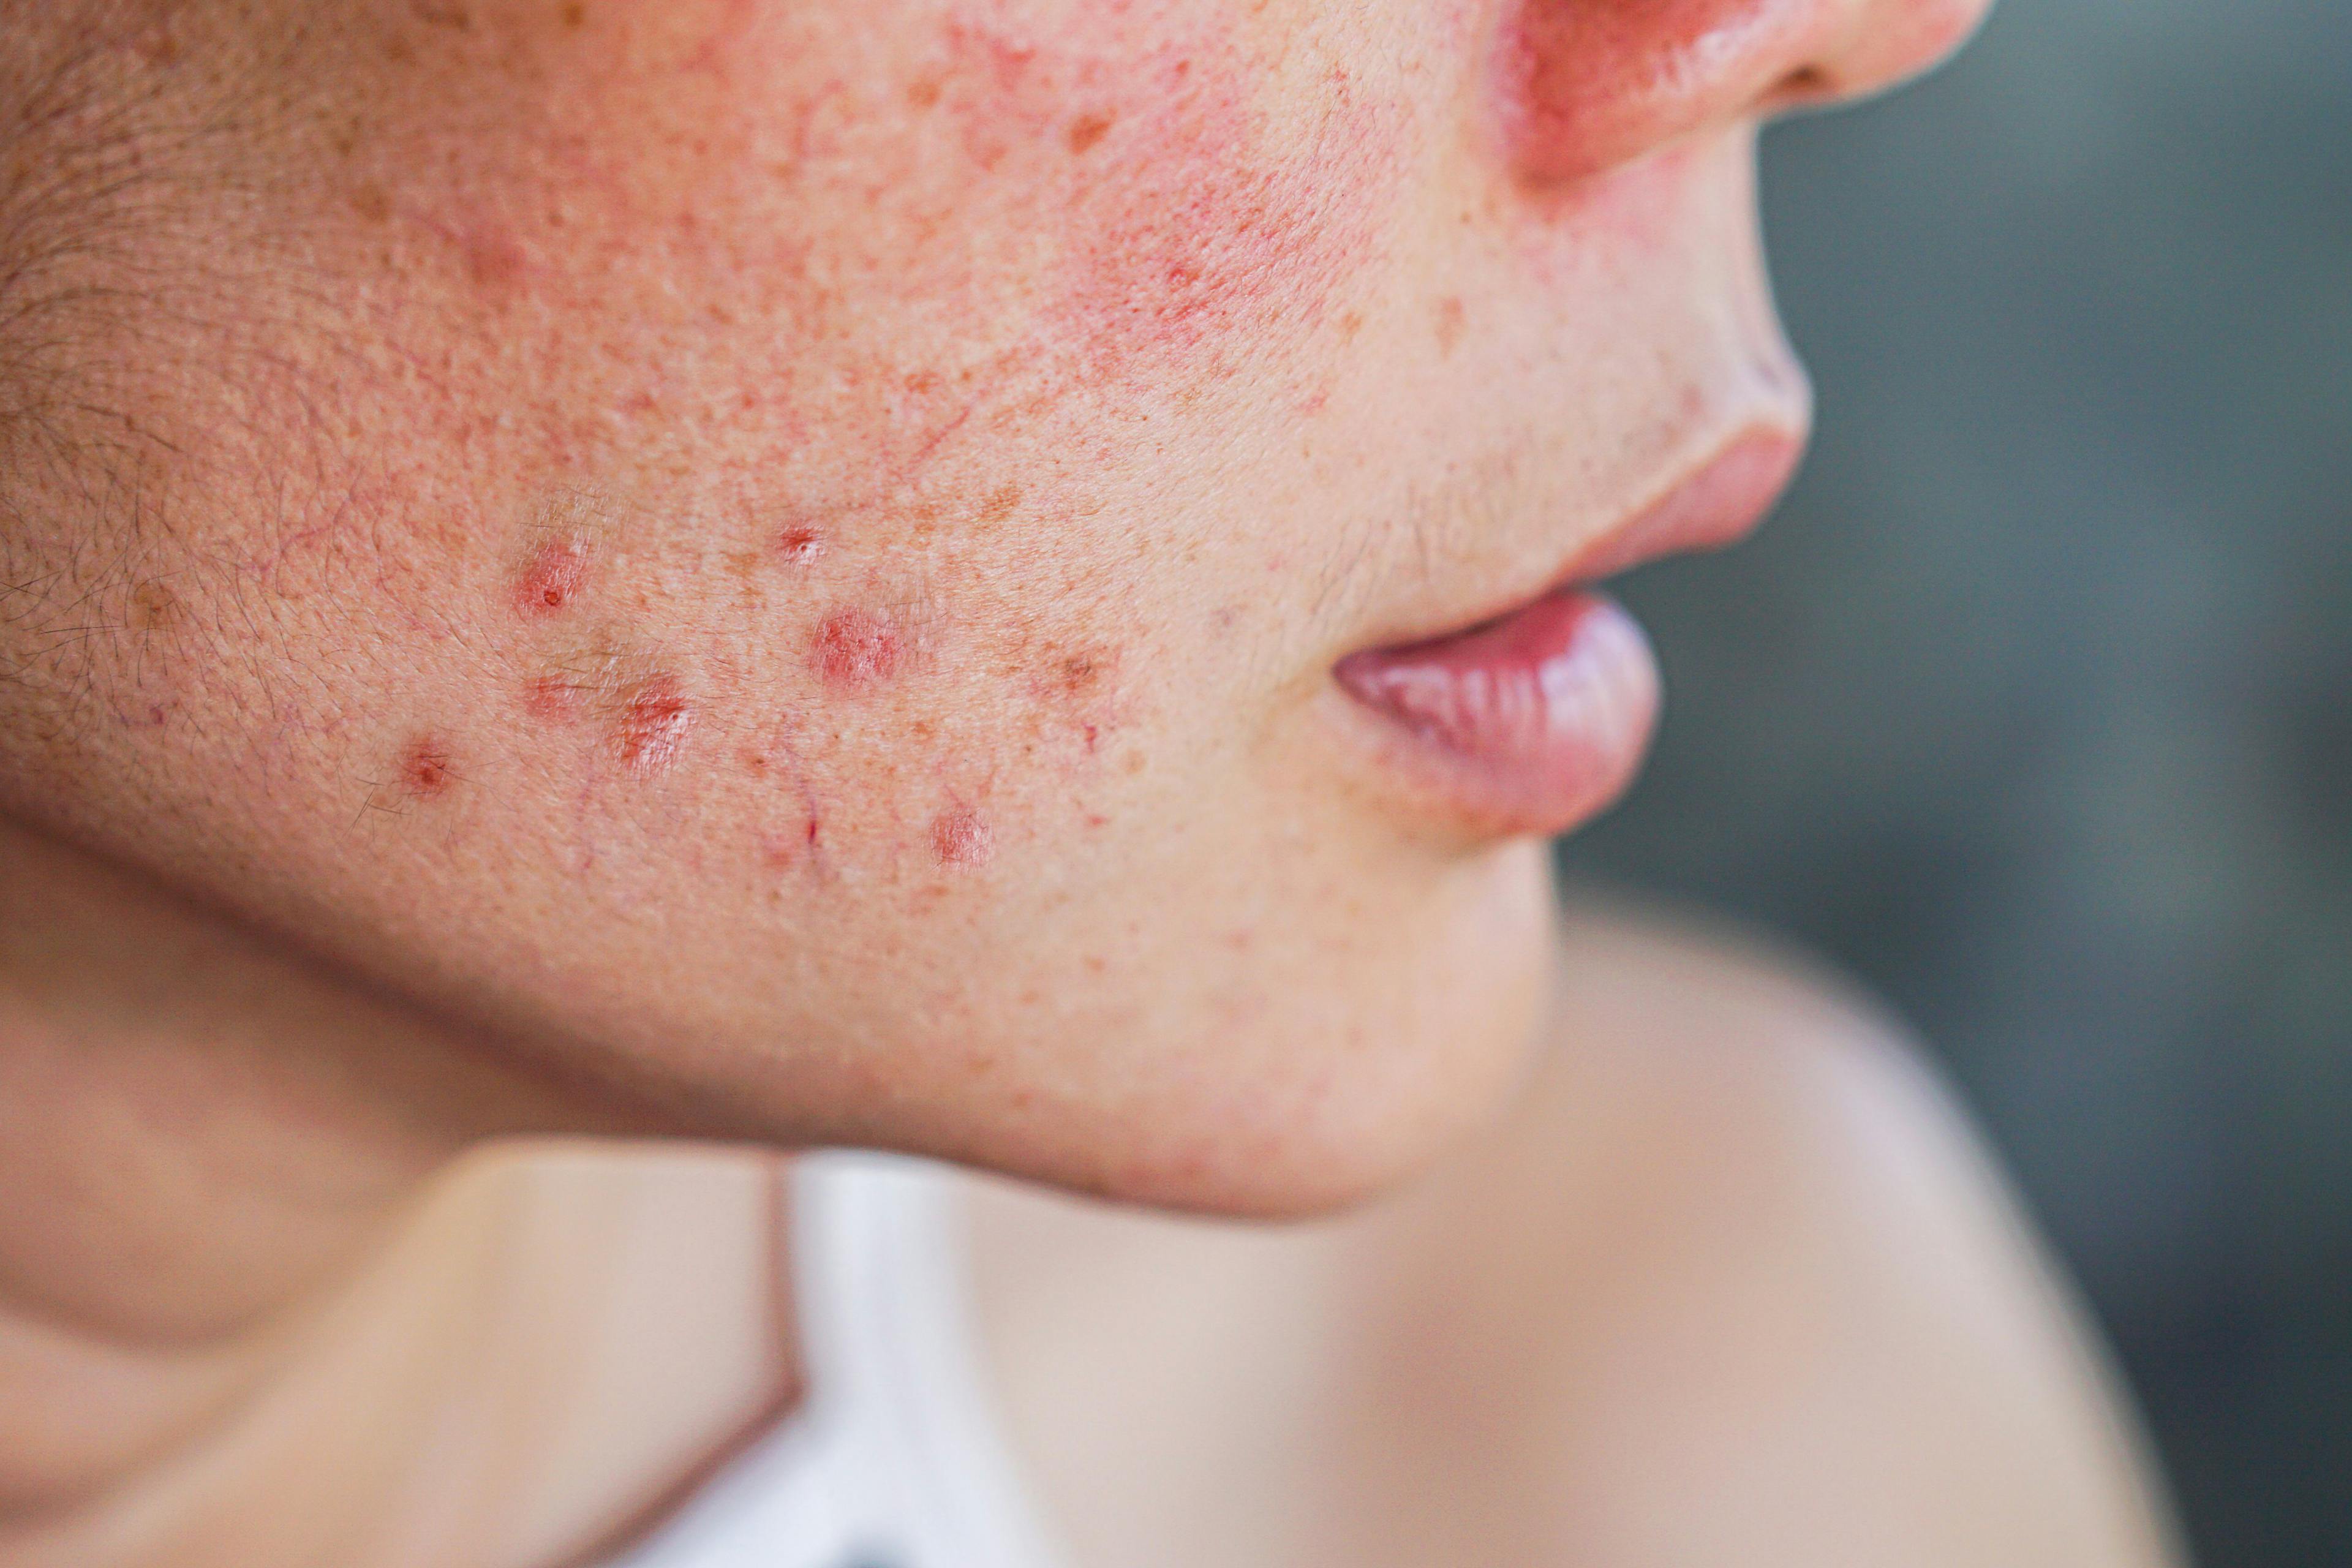 Closeup acne on woman's face with rash skin ,scar and spot that allergic to cosmetics - Image credit: Doucefleur | stock.adobe.com